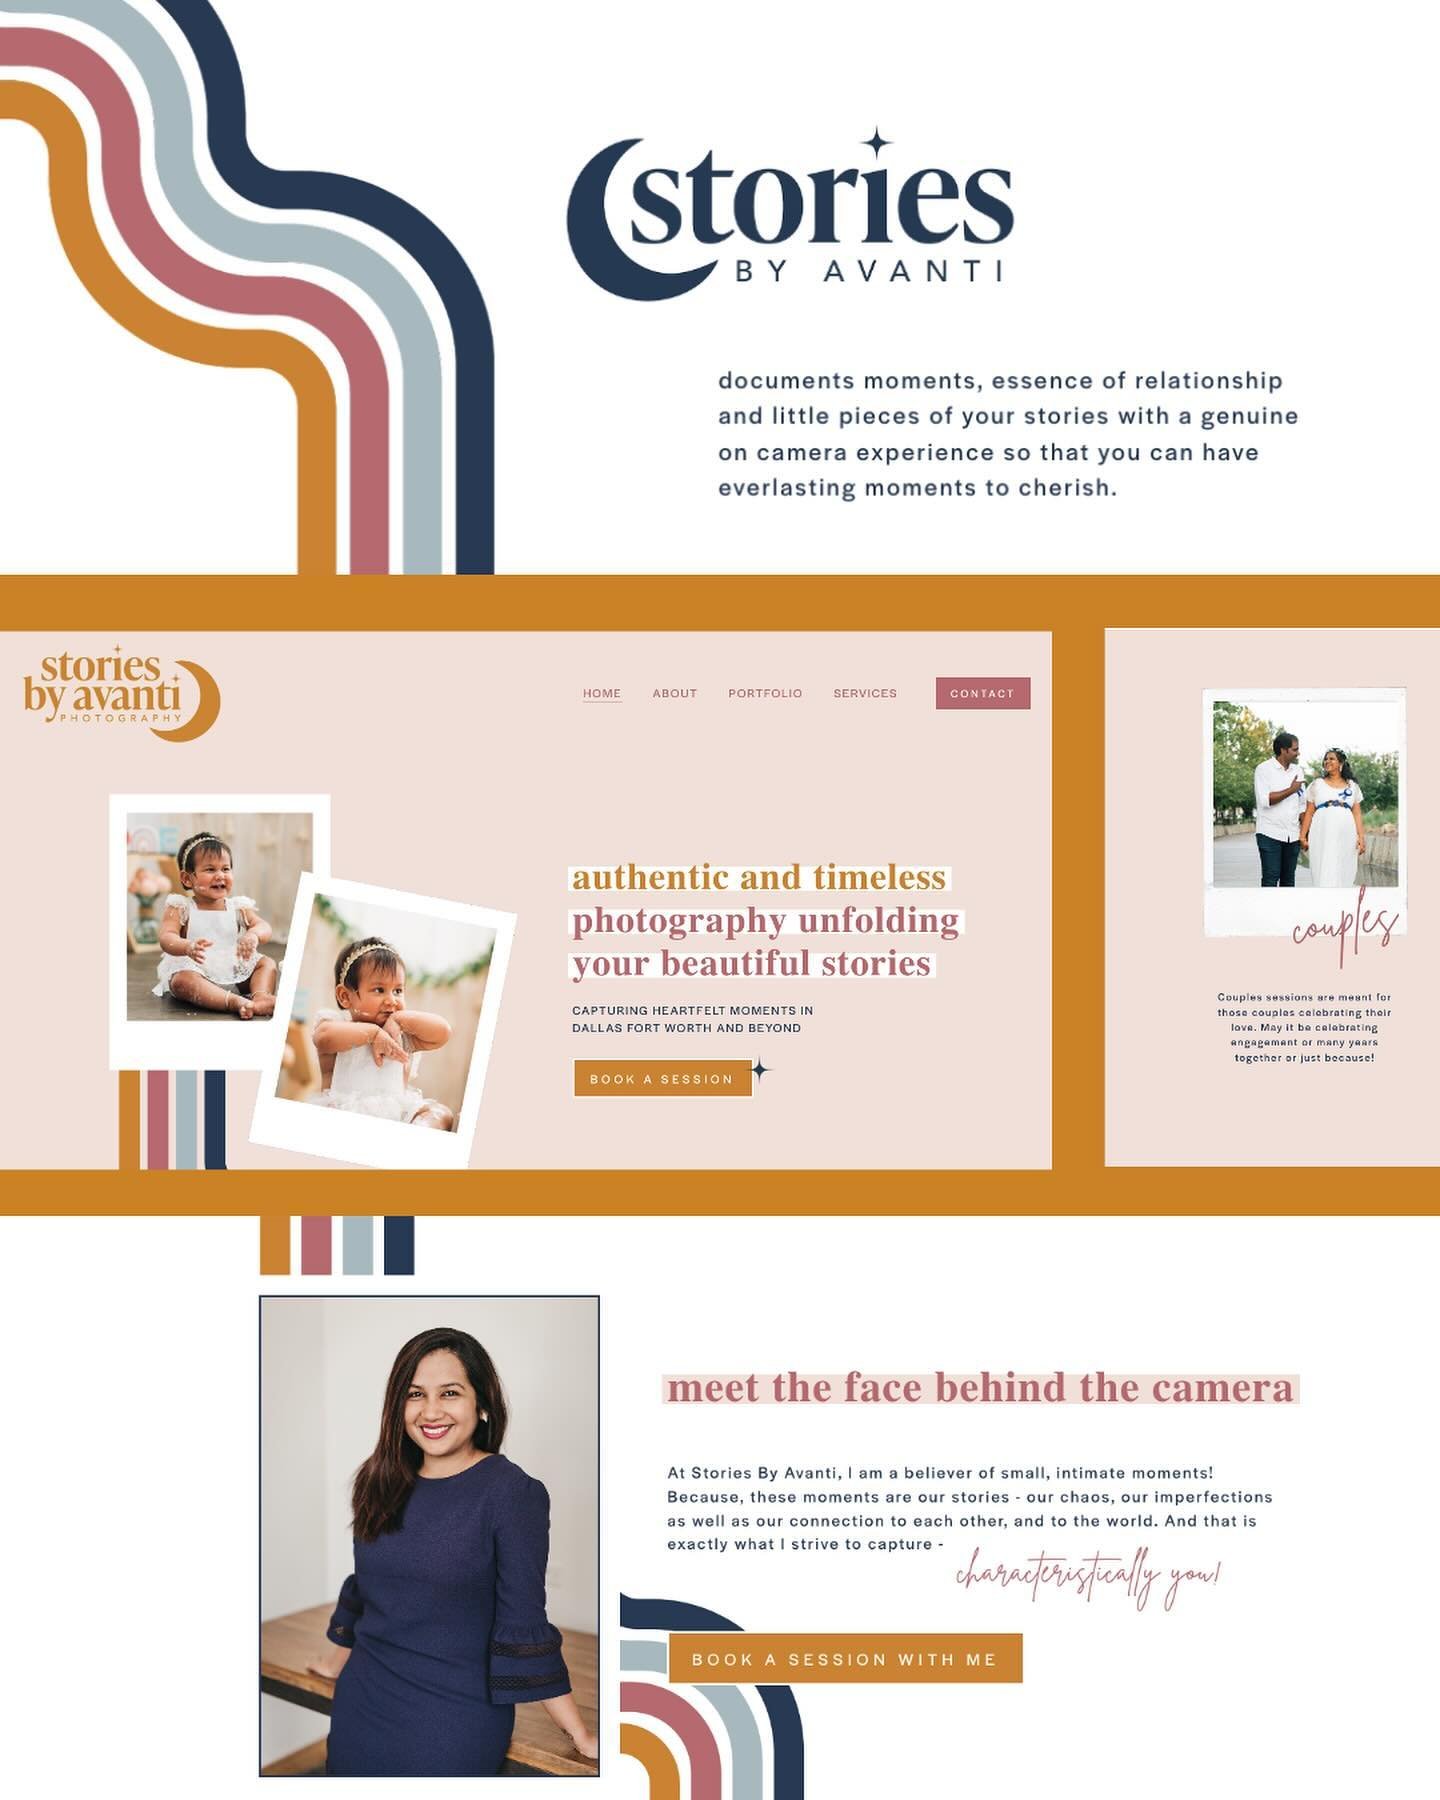 Today&rsquo;s DREAMY website reveal! 🌙

This one is dedicated to our amazing client Avanti, the owner of Stories By Avanti. 

As a natural storyteller, Avanti wanted her brand, Stories By Avanti, to capture every special moment in her clients lives 